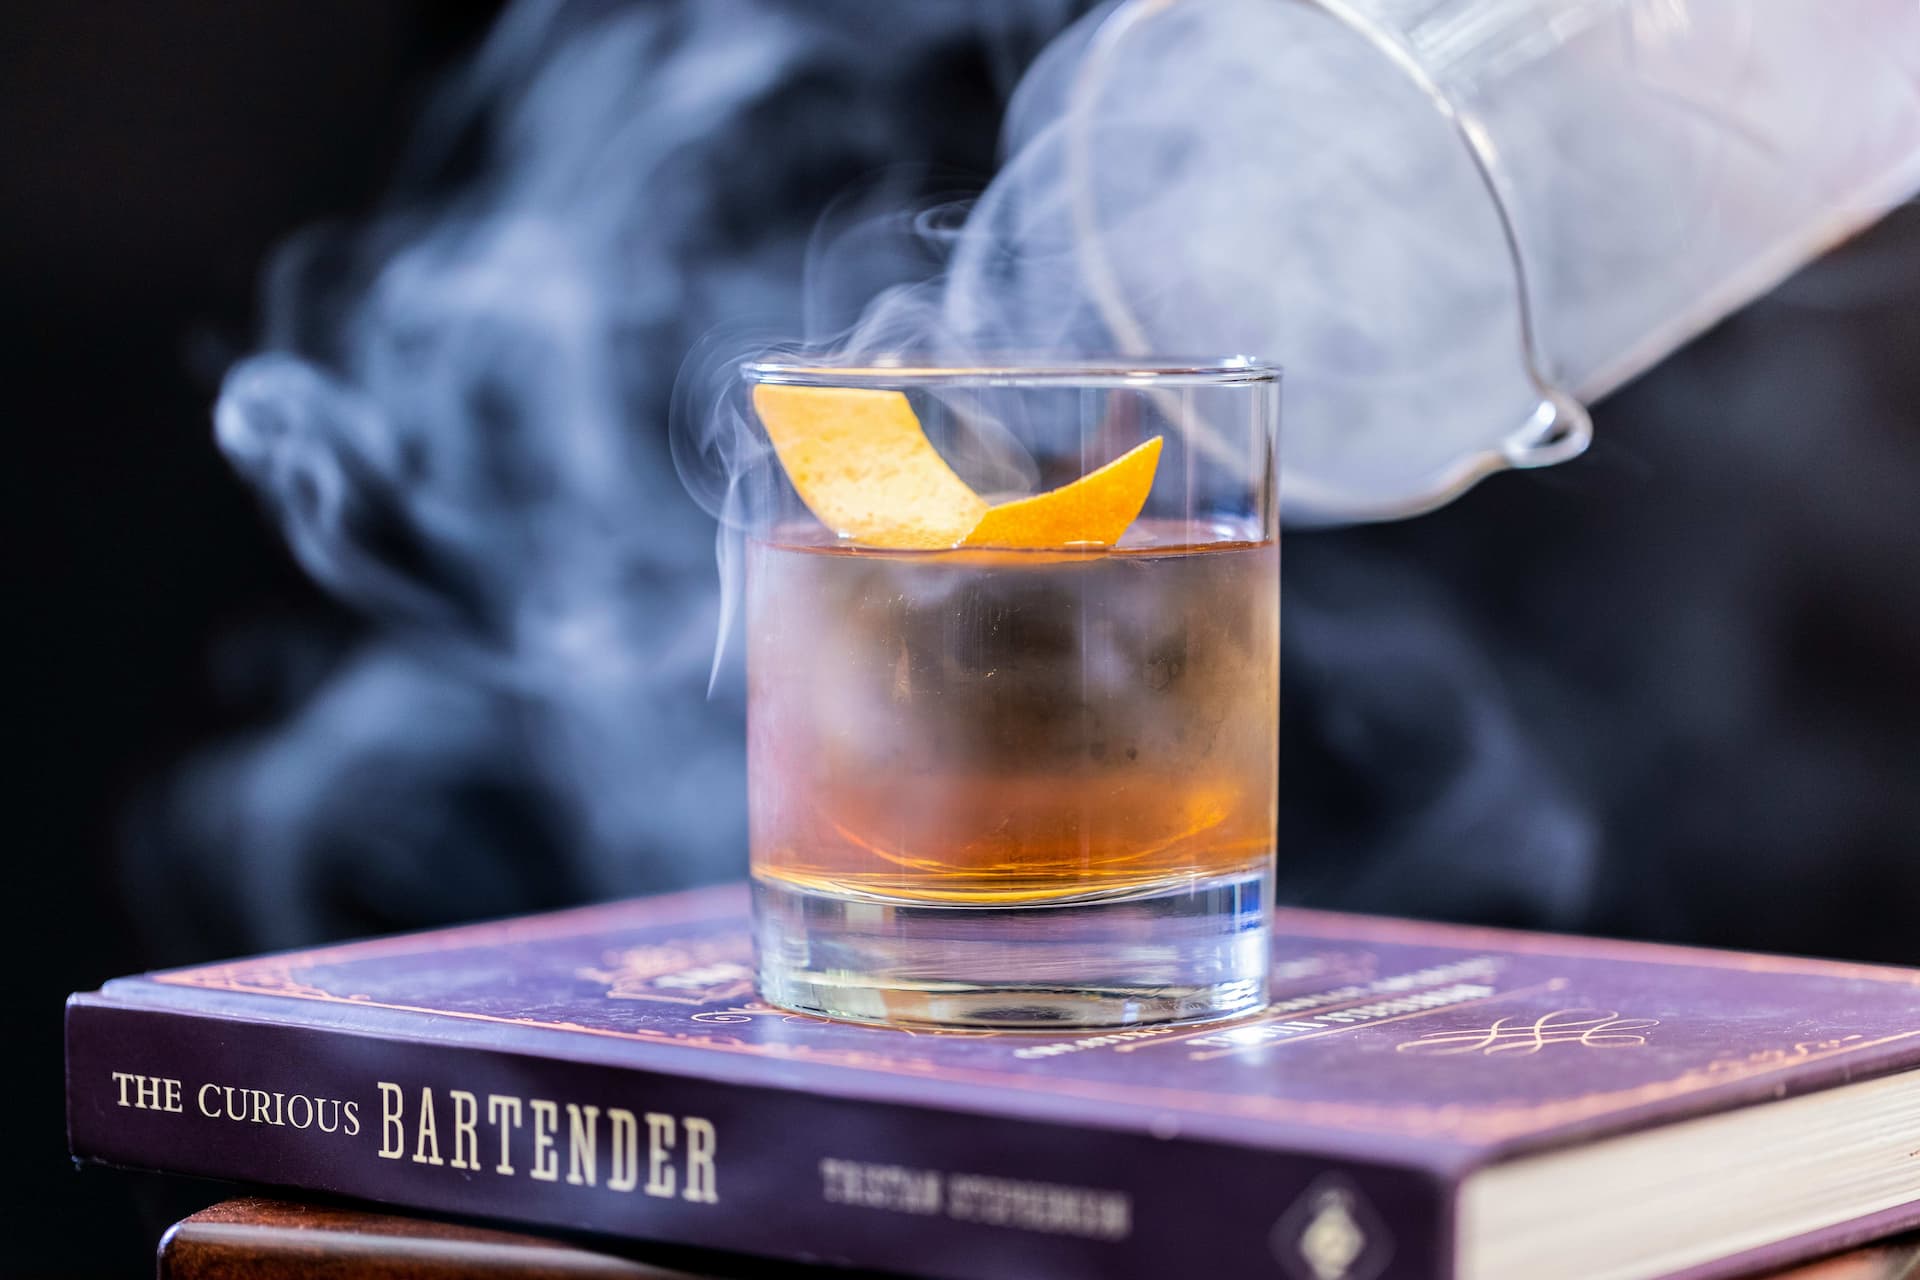 Smoke adds a nice visual effect to your cocktails